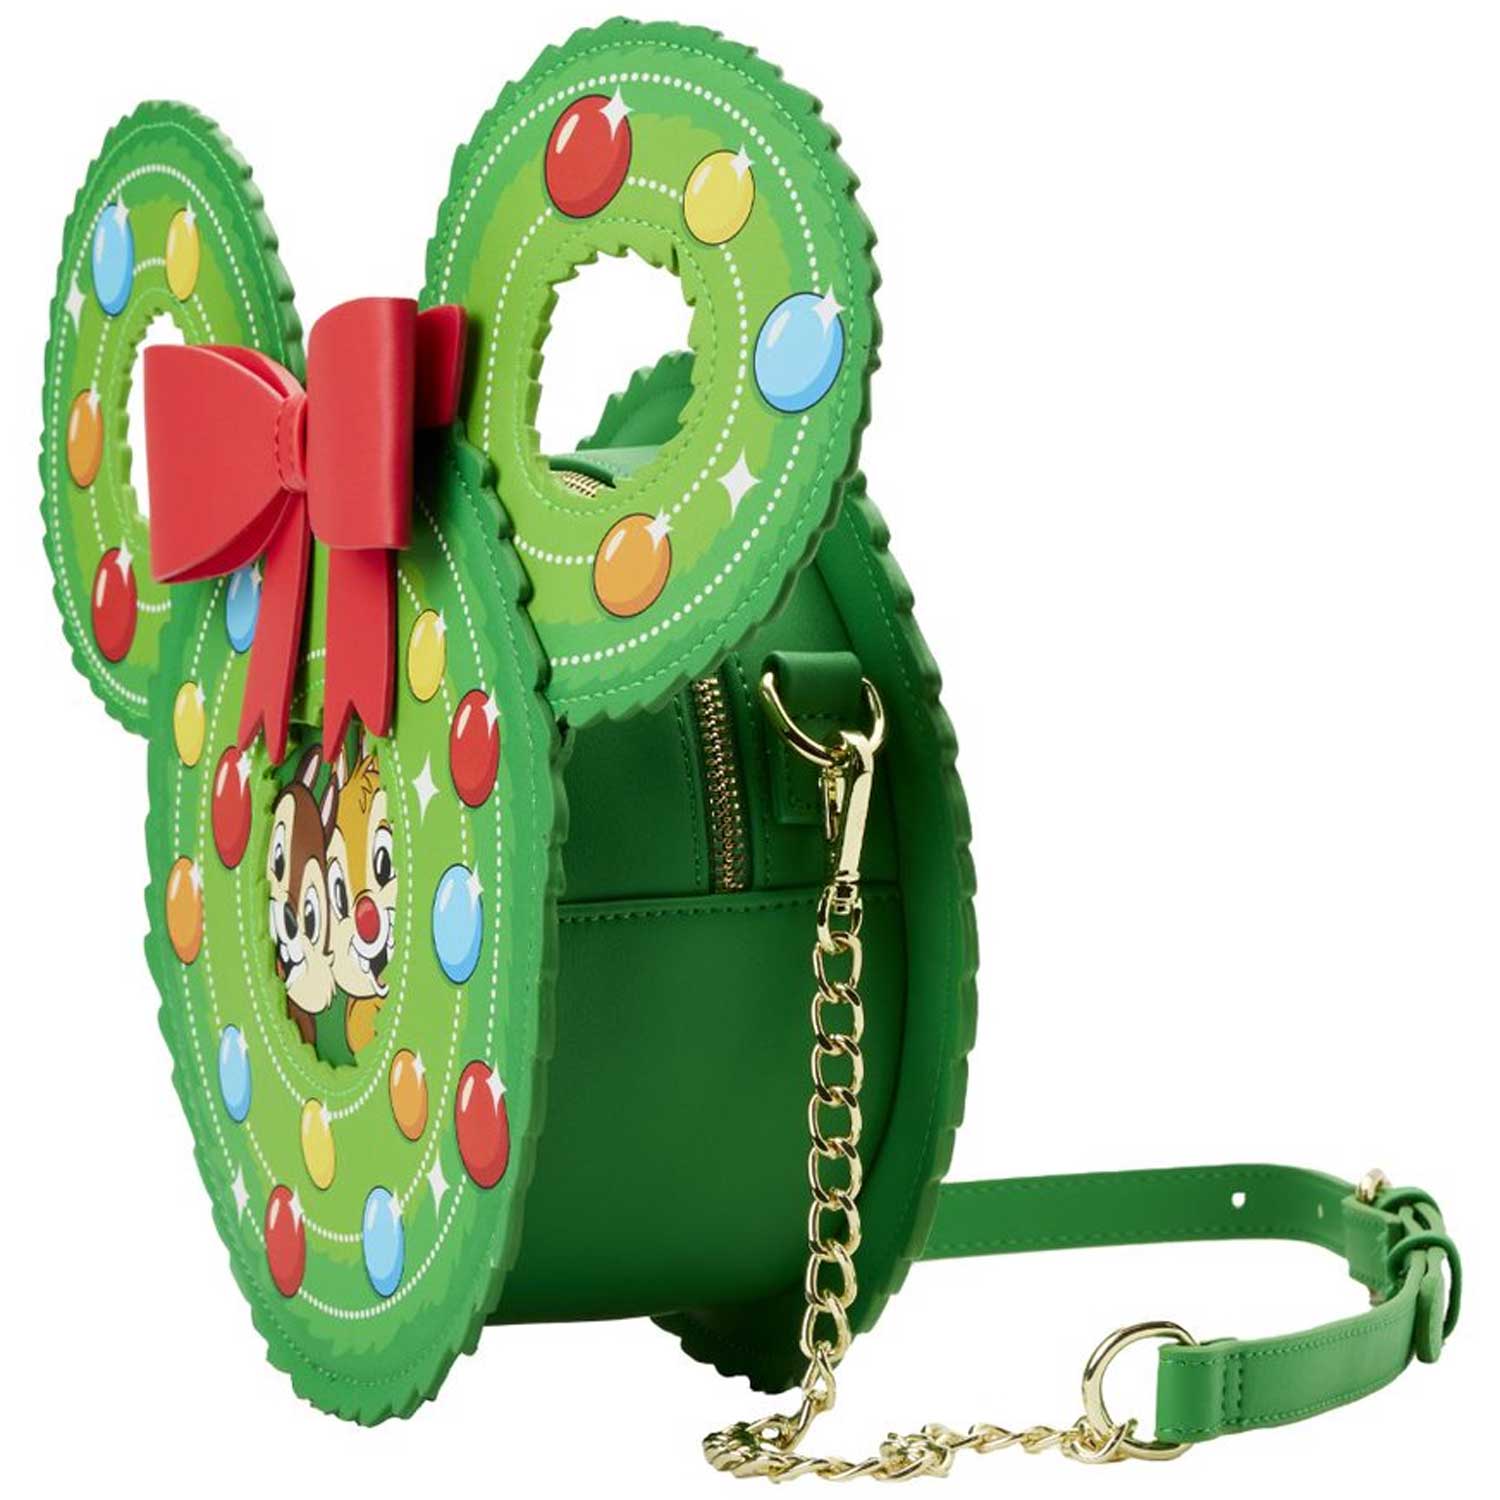 Loungefly x Disney Chip and Dale Figural Wreath Crossbody Bag